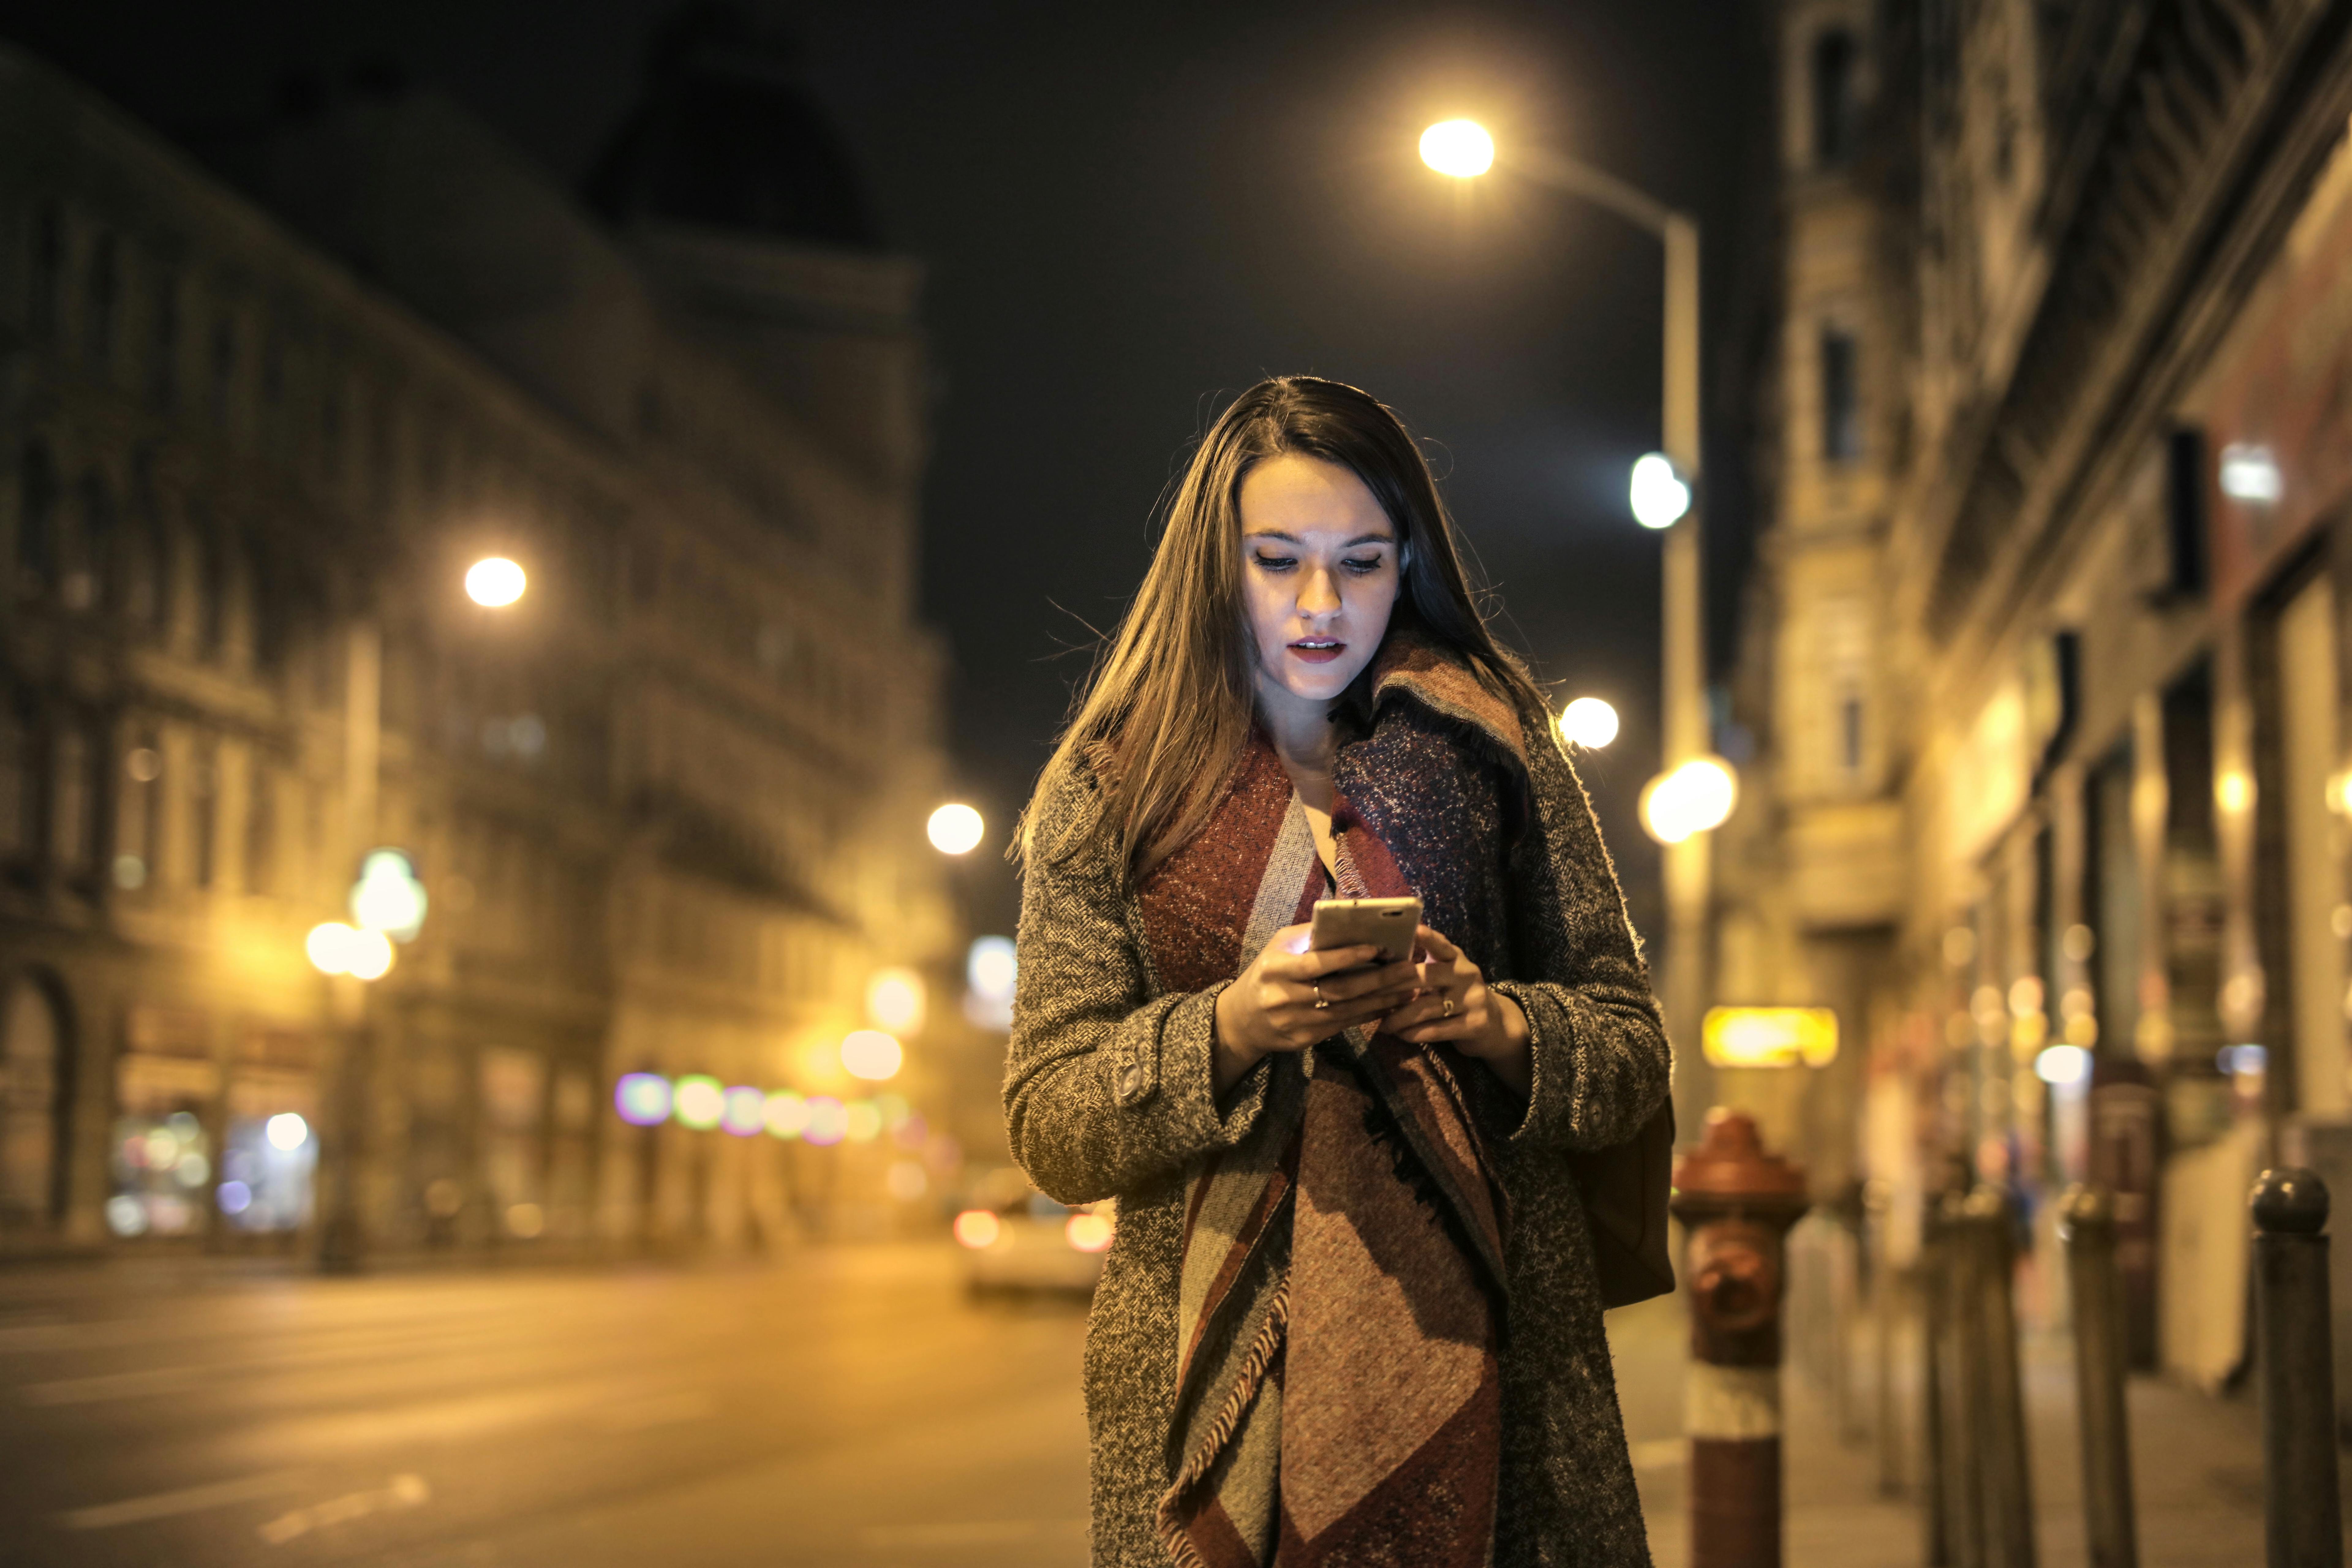 A woman making looking at her cellphone in the middle of a street | Source: Pexels